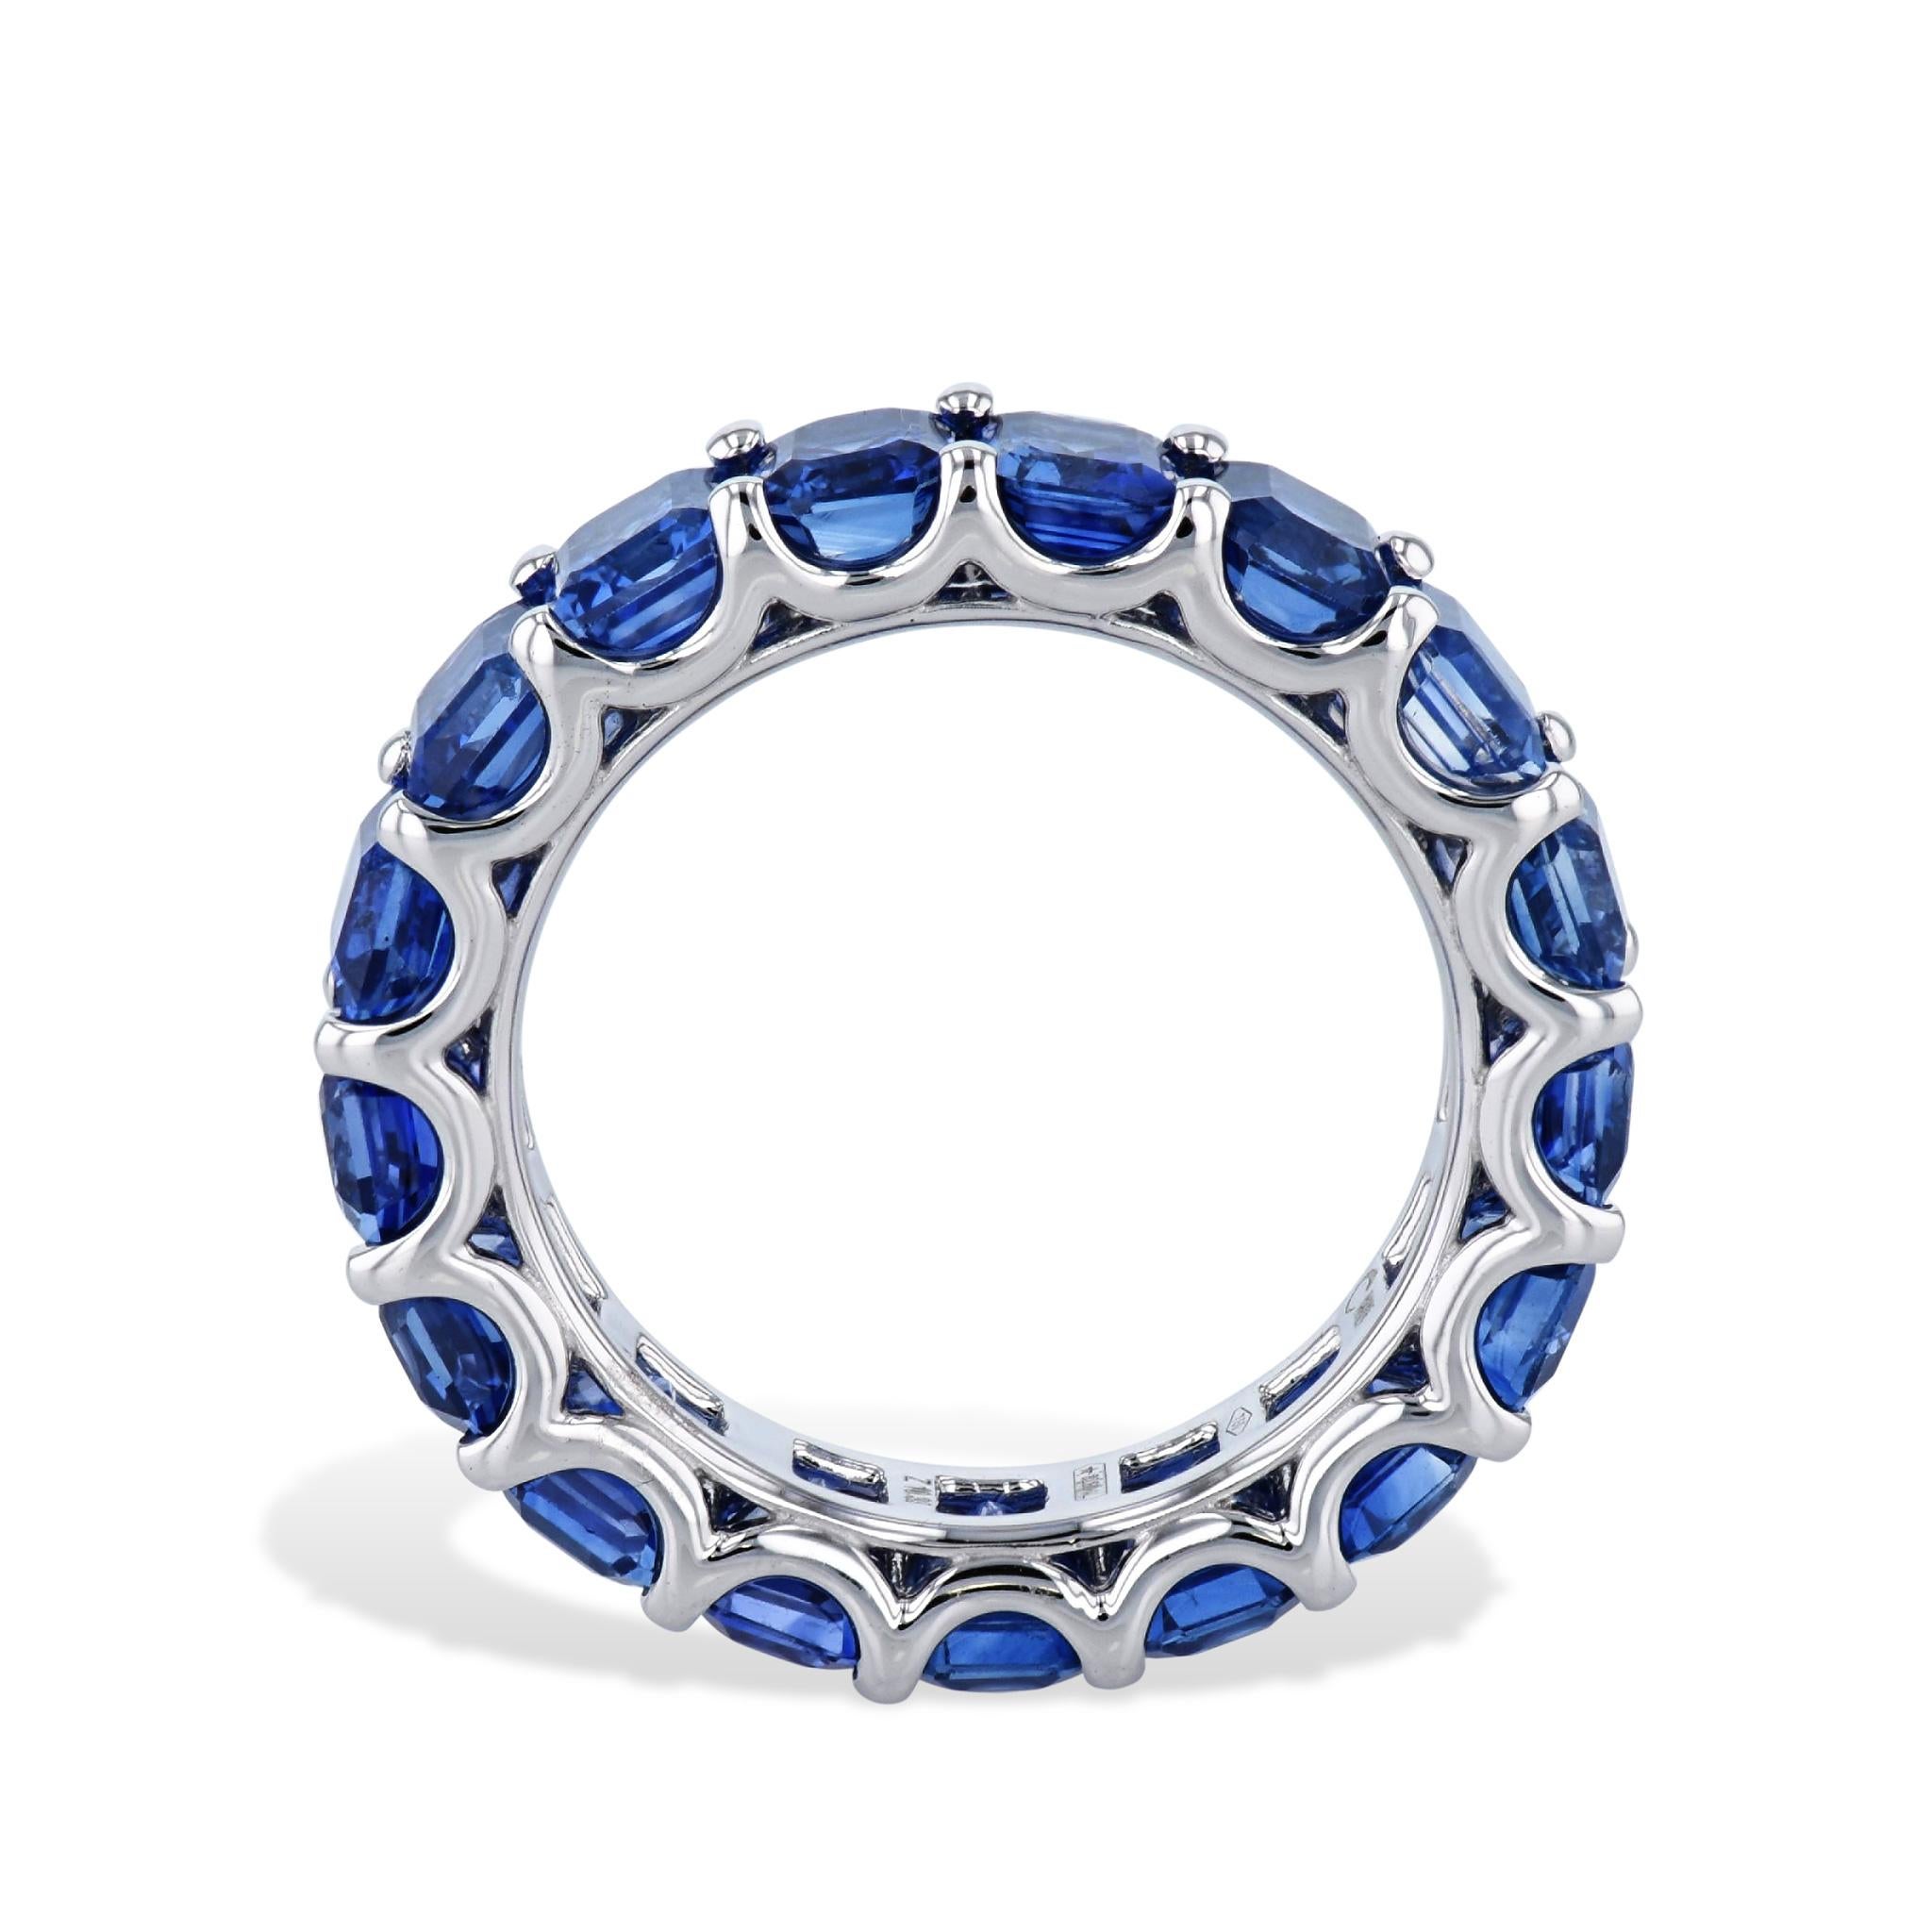 10.33 Carat Sapphire Eternity Band Ring White Gold In New Condition For Sale In Miami, FL